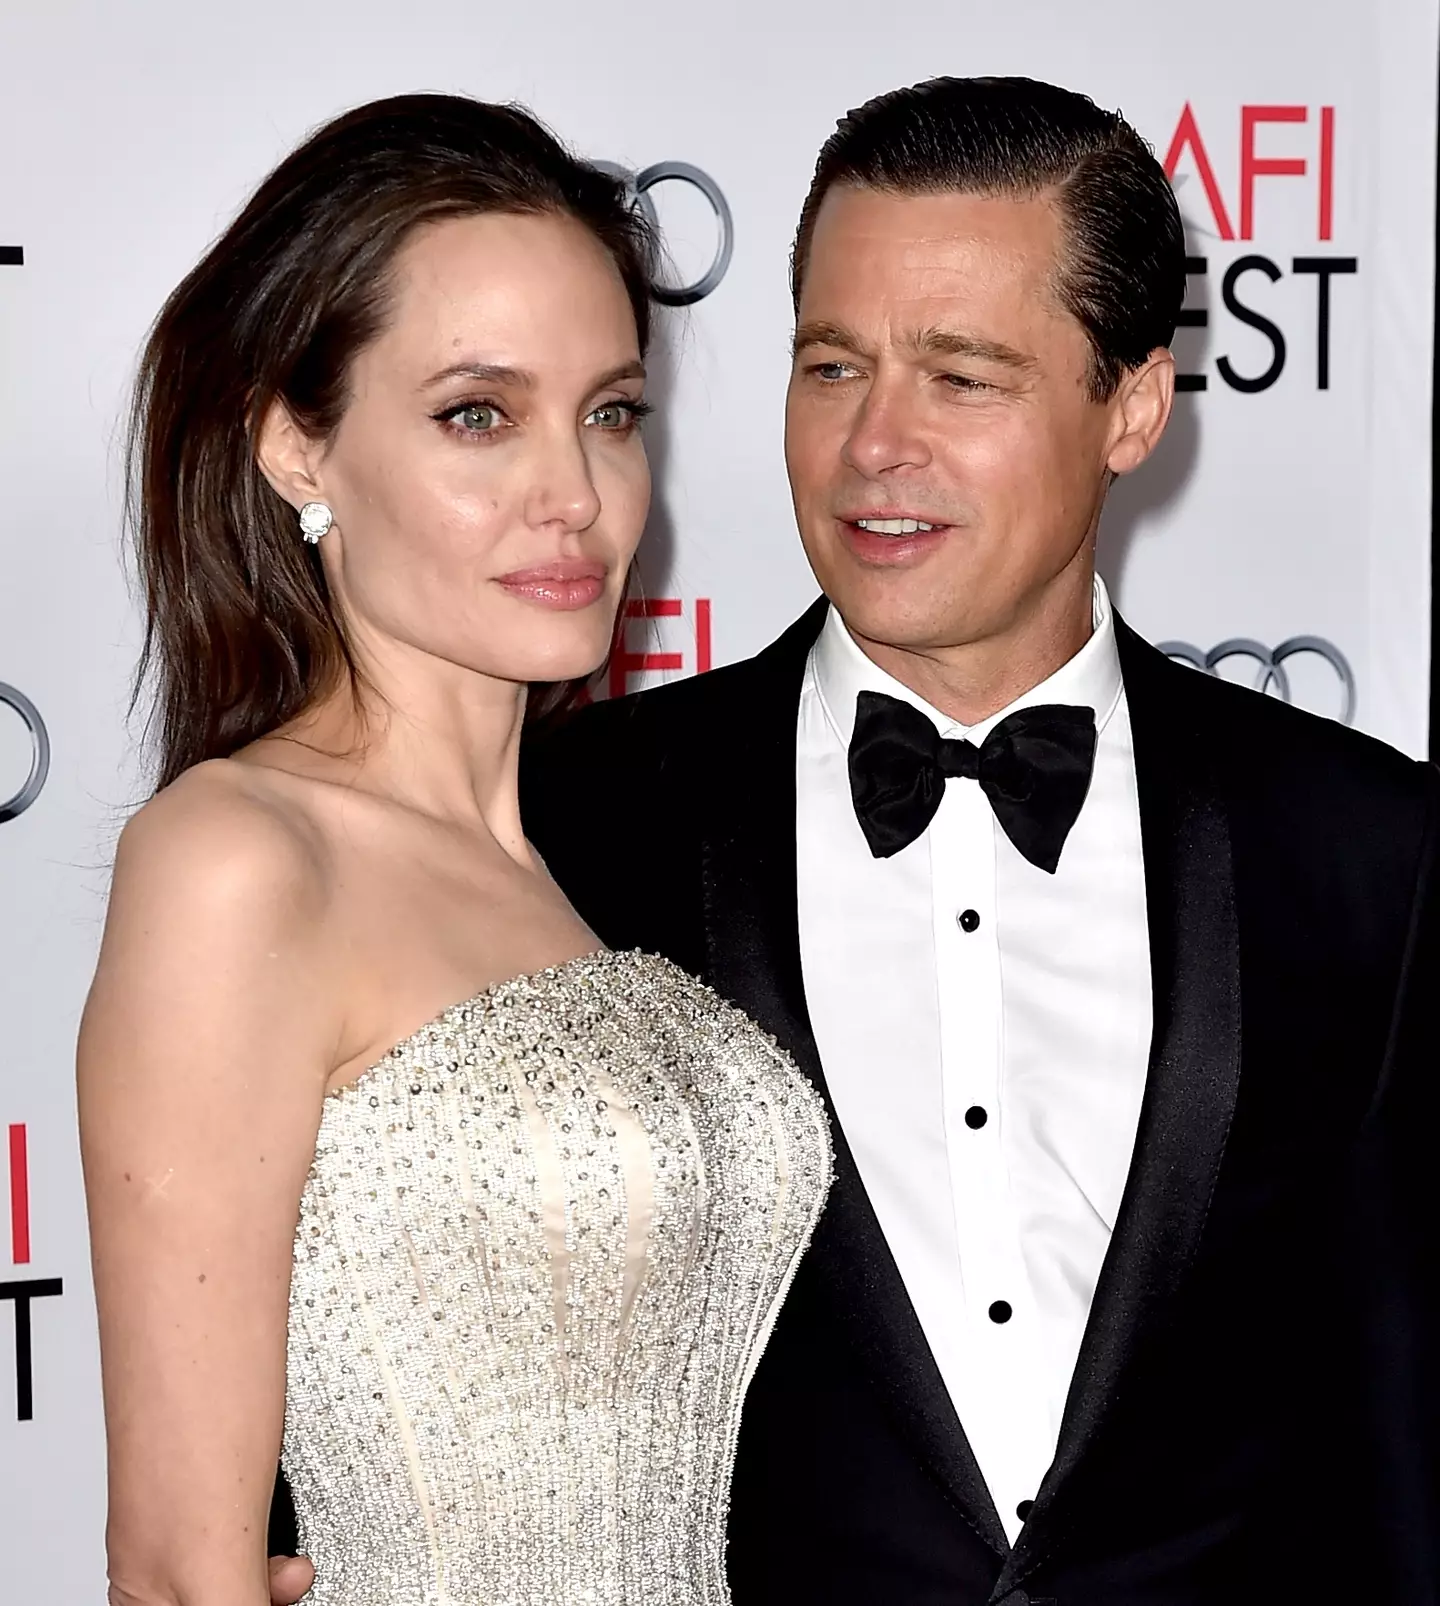 Jolie has accused her ex of 'bleeding her dry'. (Kevin Winter/Getty Images)